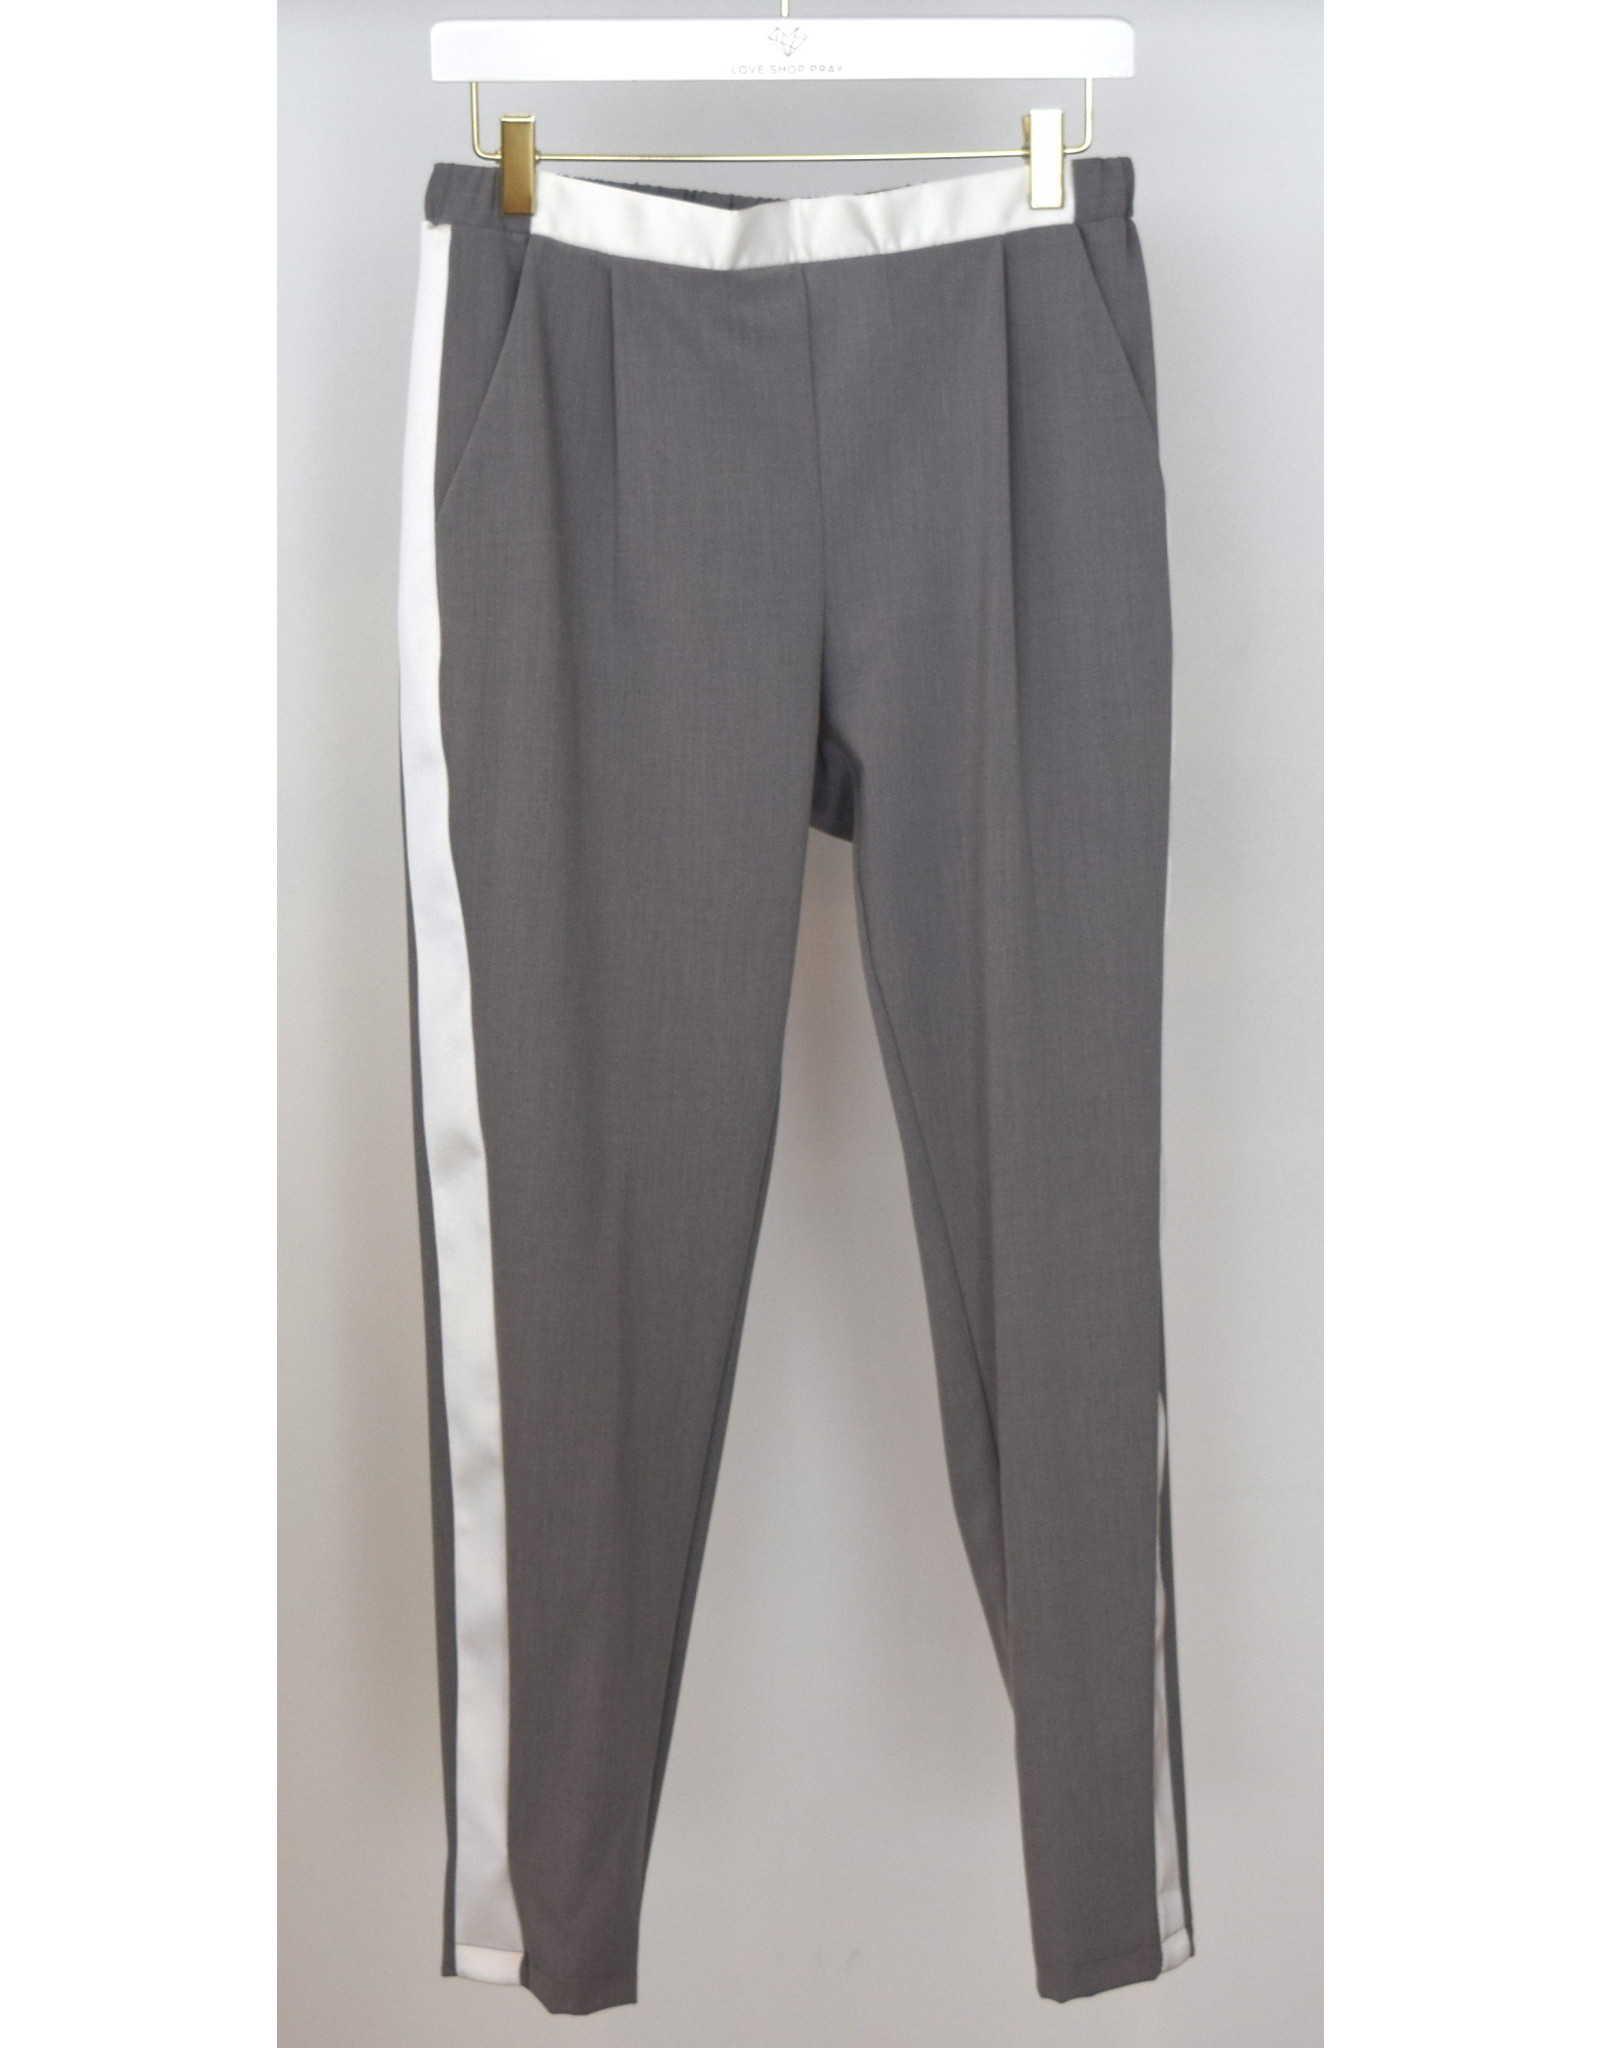 Imperial/Dixie Elastic waist side band pants